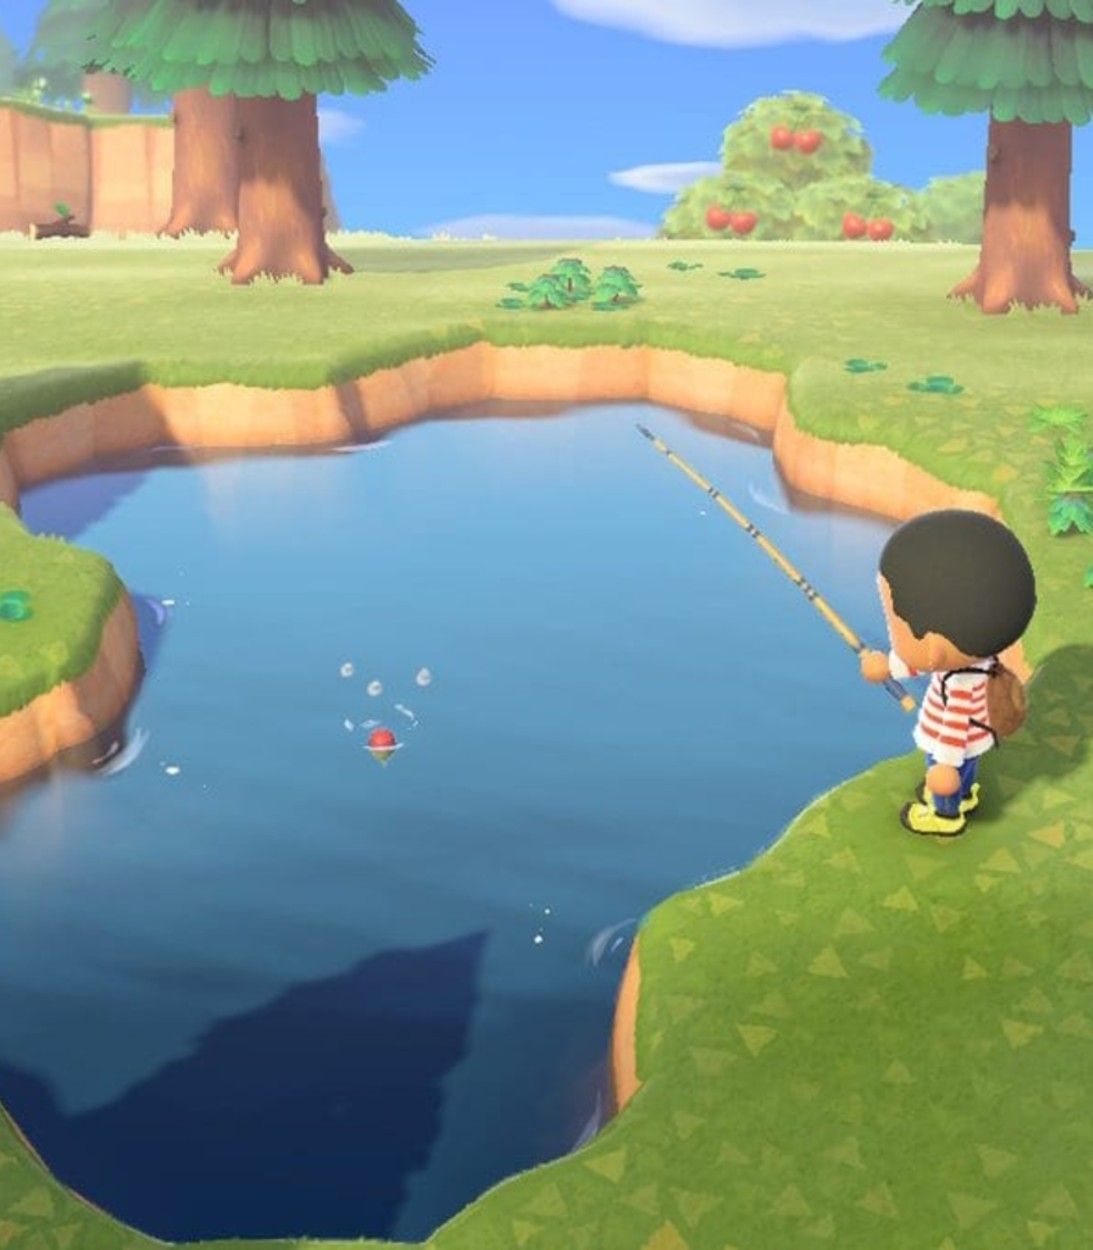 A player fishes in the holding pond on their island in Animal Crossing: New Horizons